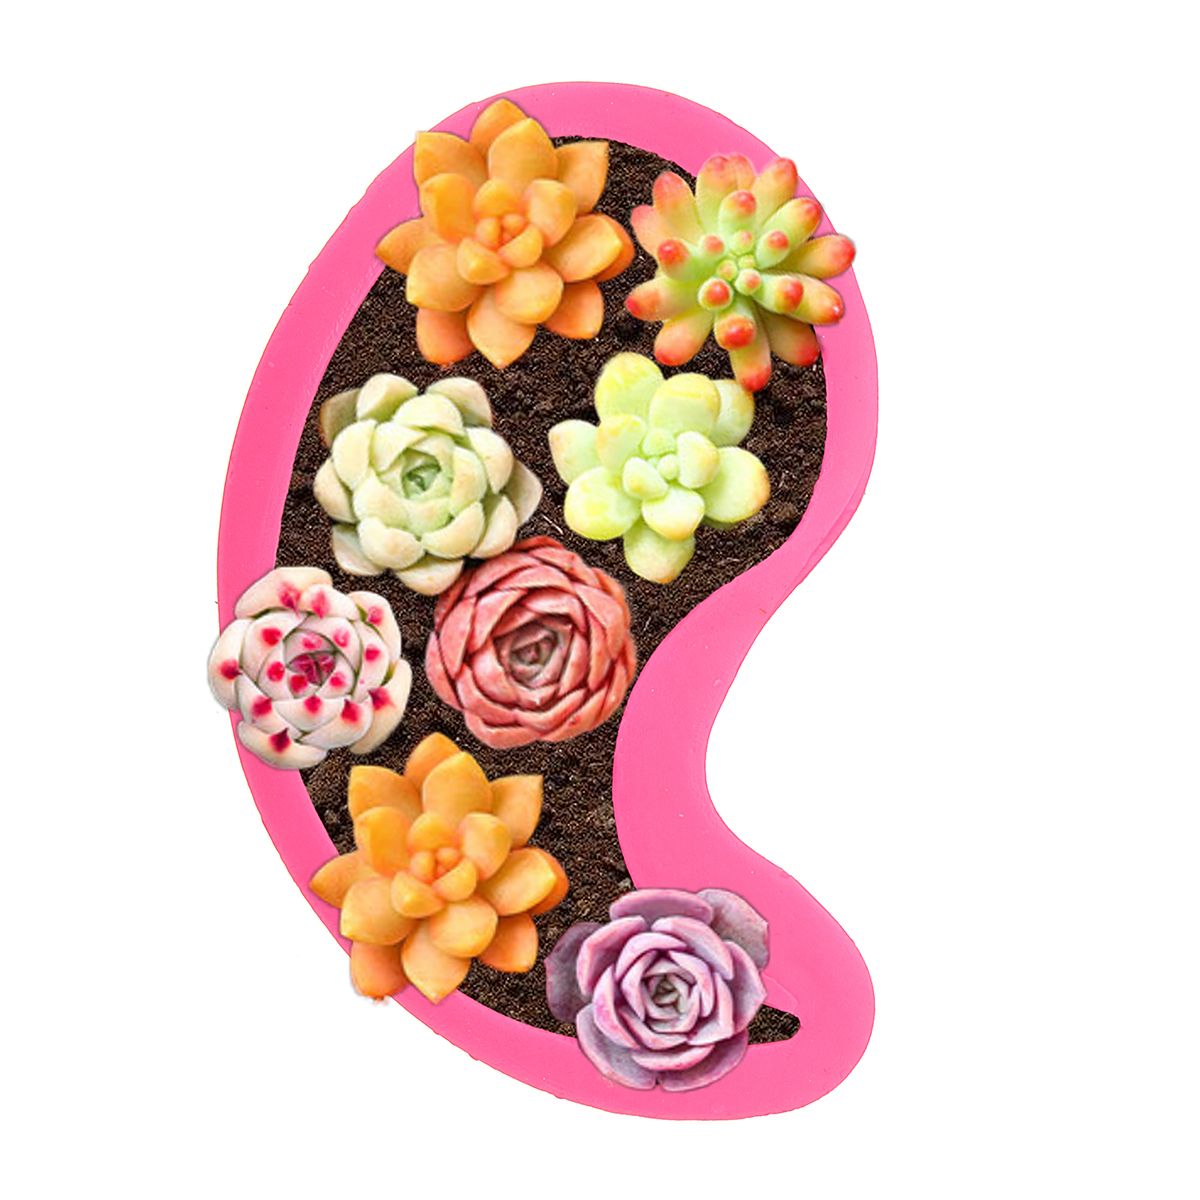 Silicone-Mold-Gossip-Shape-Concrete-Cement-Tabletop-Flowerpot-Chocolate-Mould-Crafts-1557222